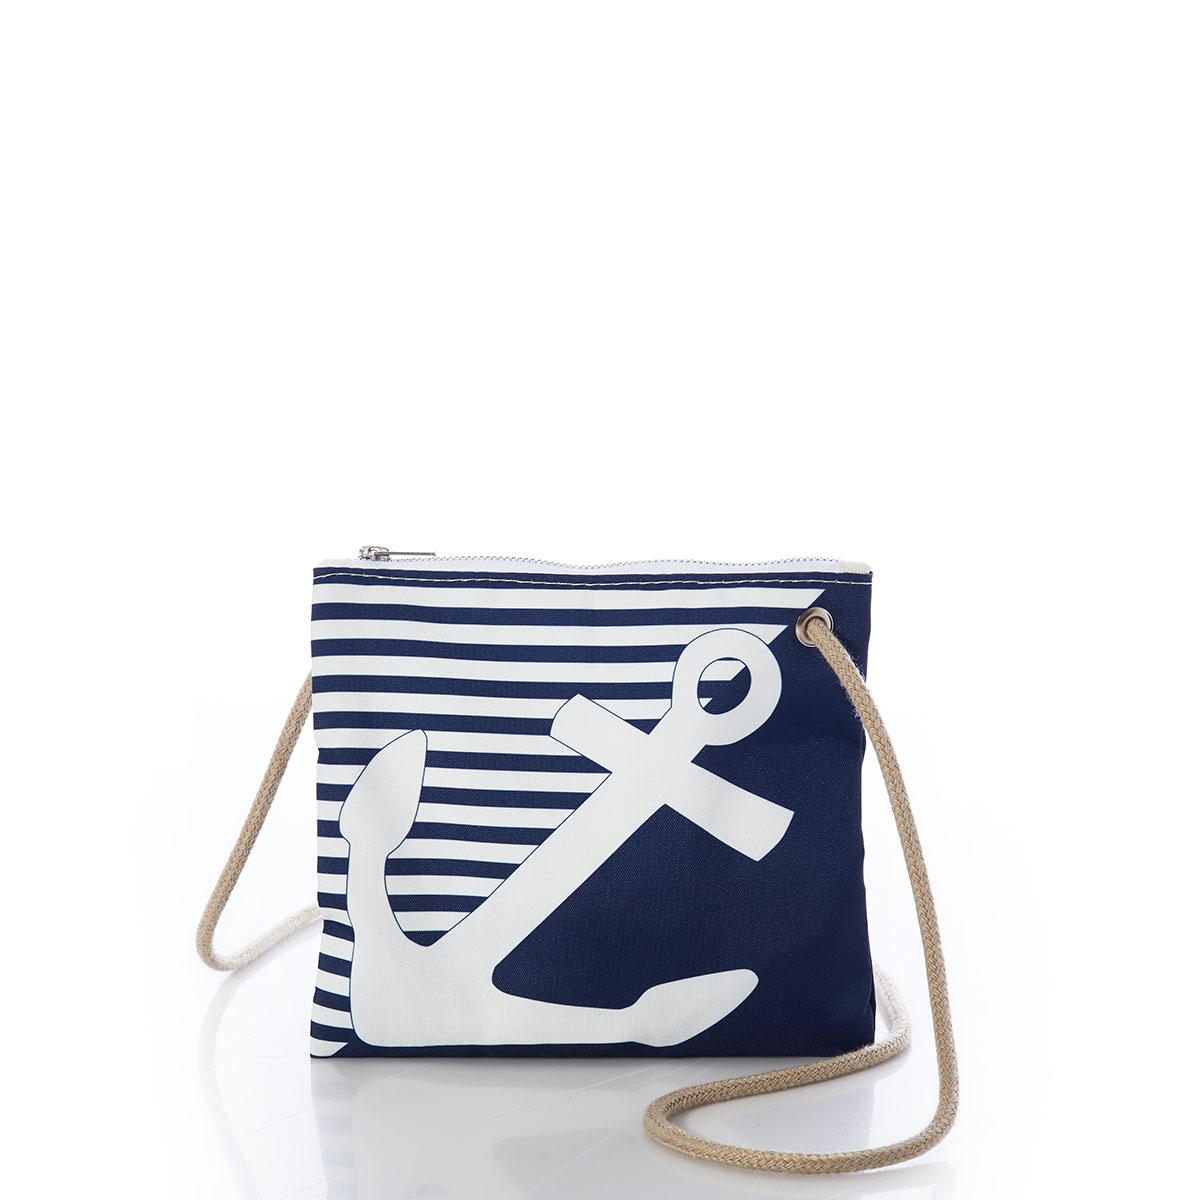 a white anchor divides a solid navy blue bottom right triangle and a navy and white striped top left triangle, printed on a recycled sail cloth crossbody bag with tan rope handle